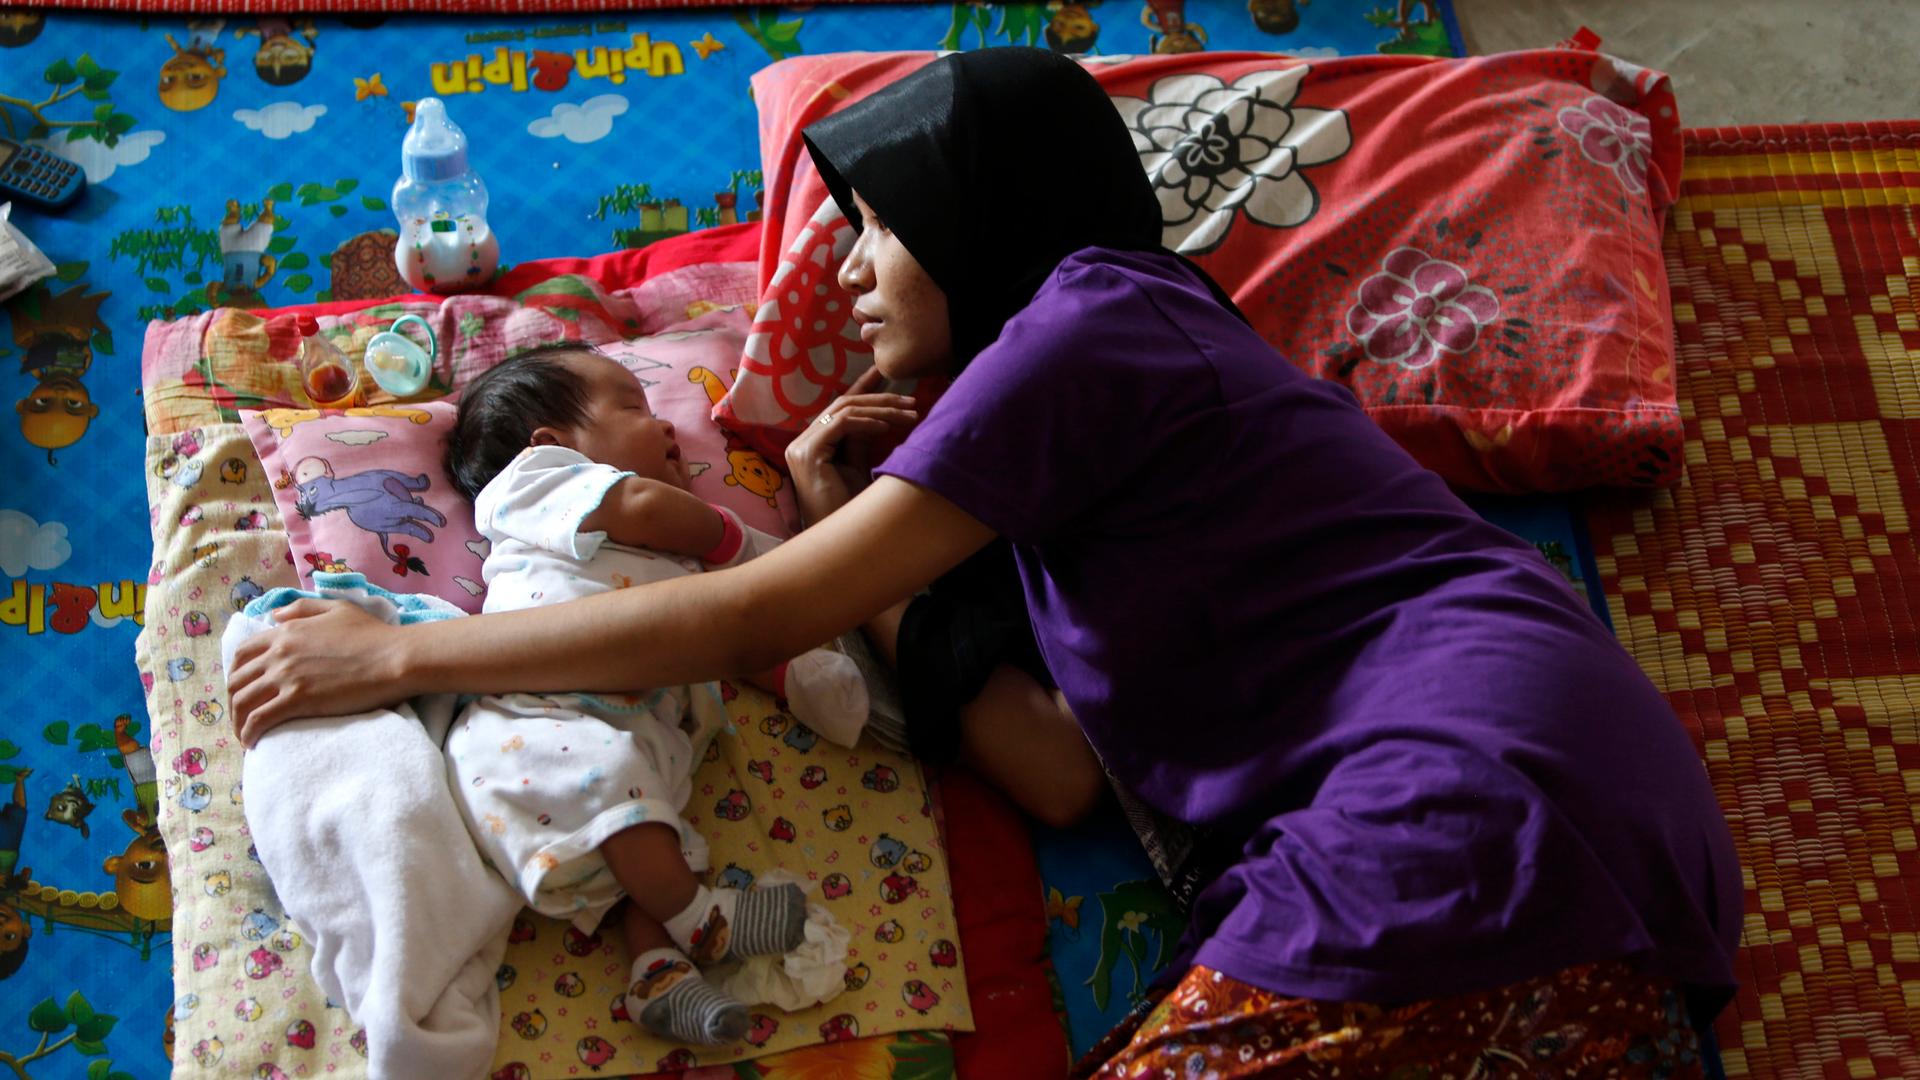 A woman rests next to her baby outside Kuala Lumpur.